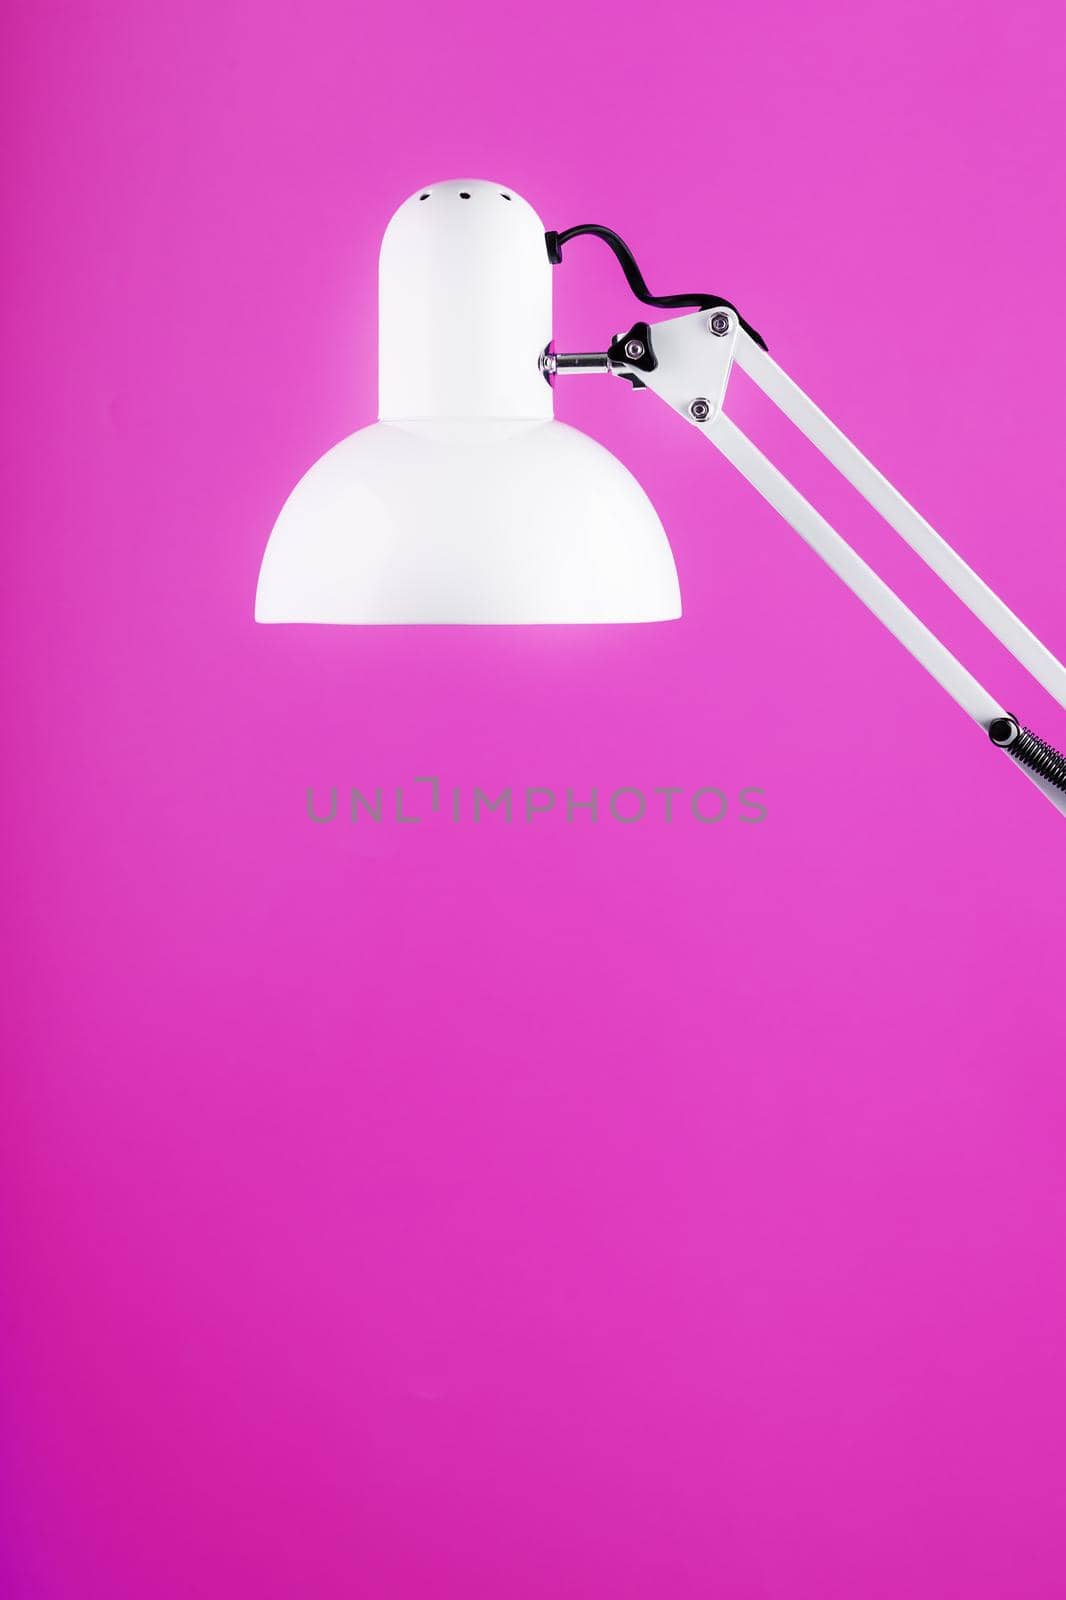 White table office lamp on pink background with space for text and idea concept by AlexGrec